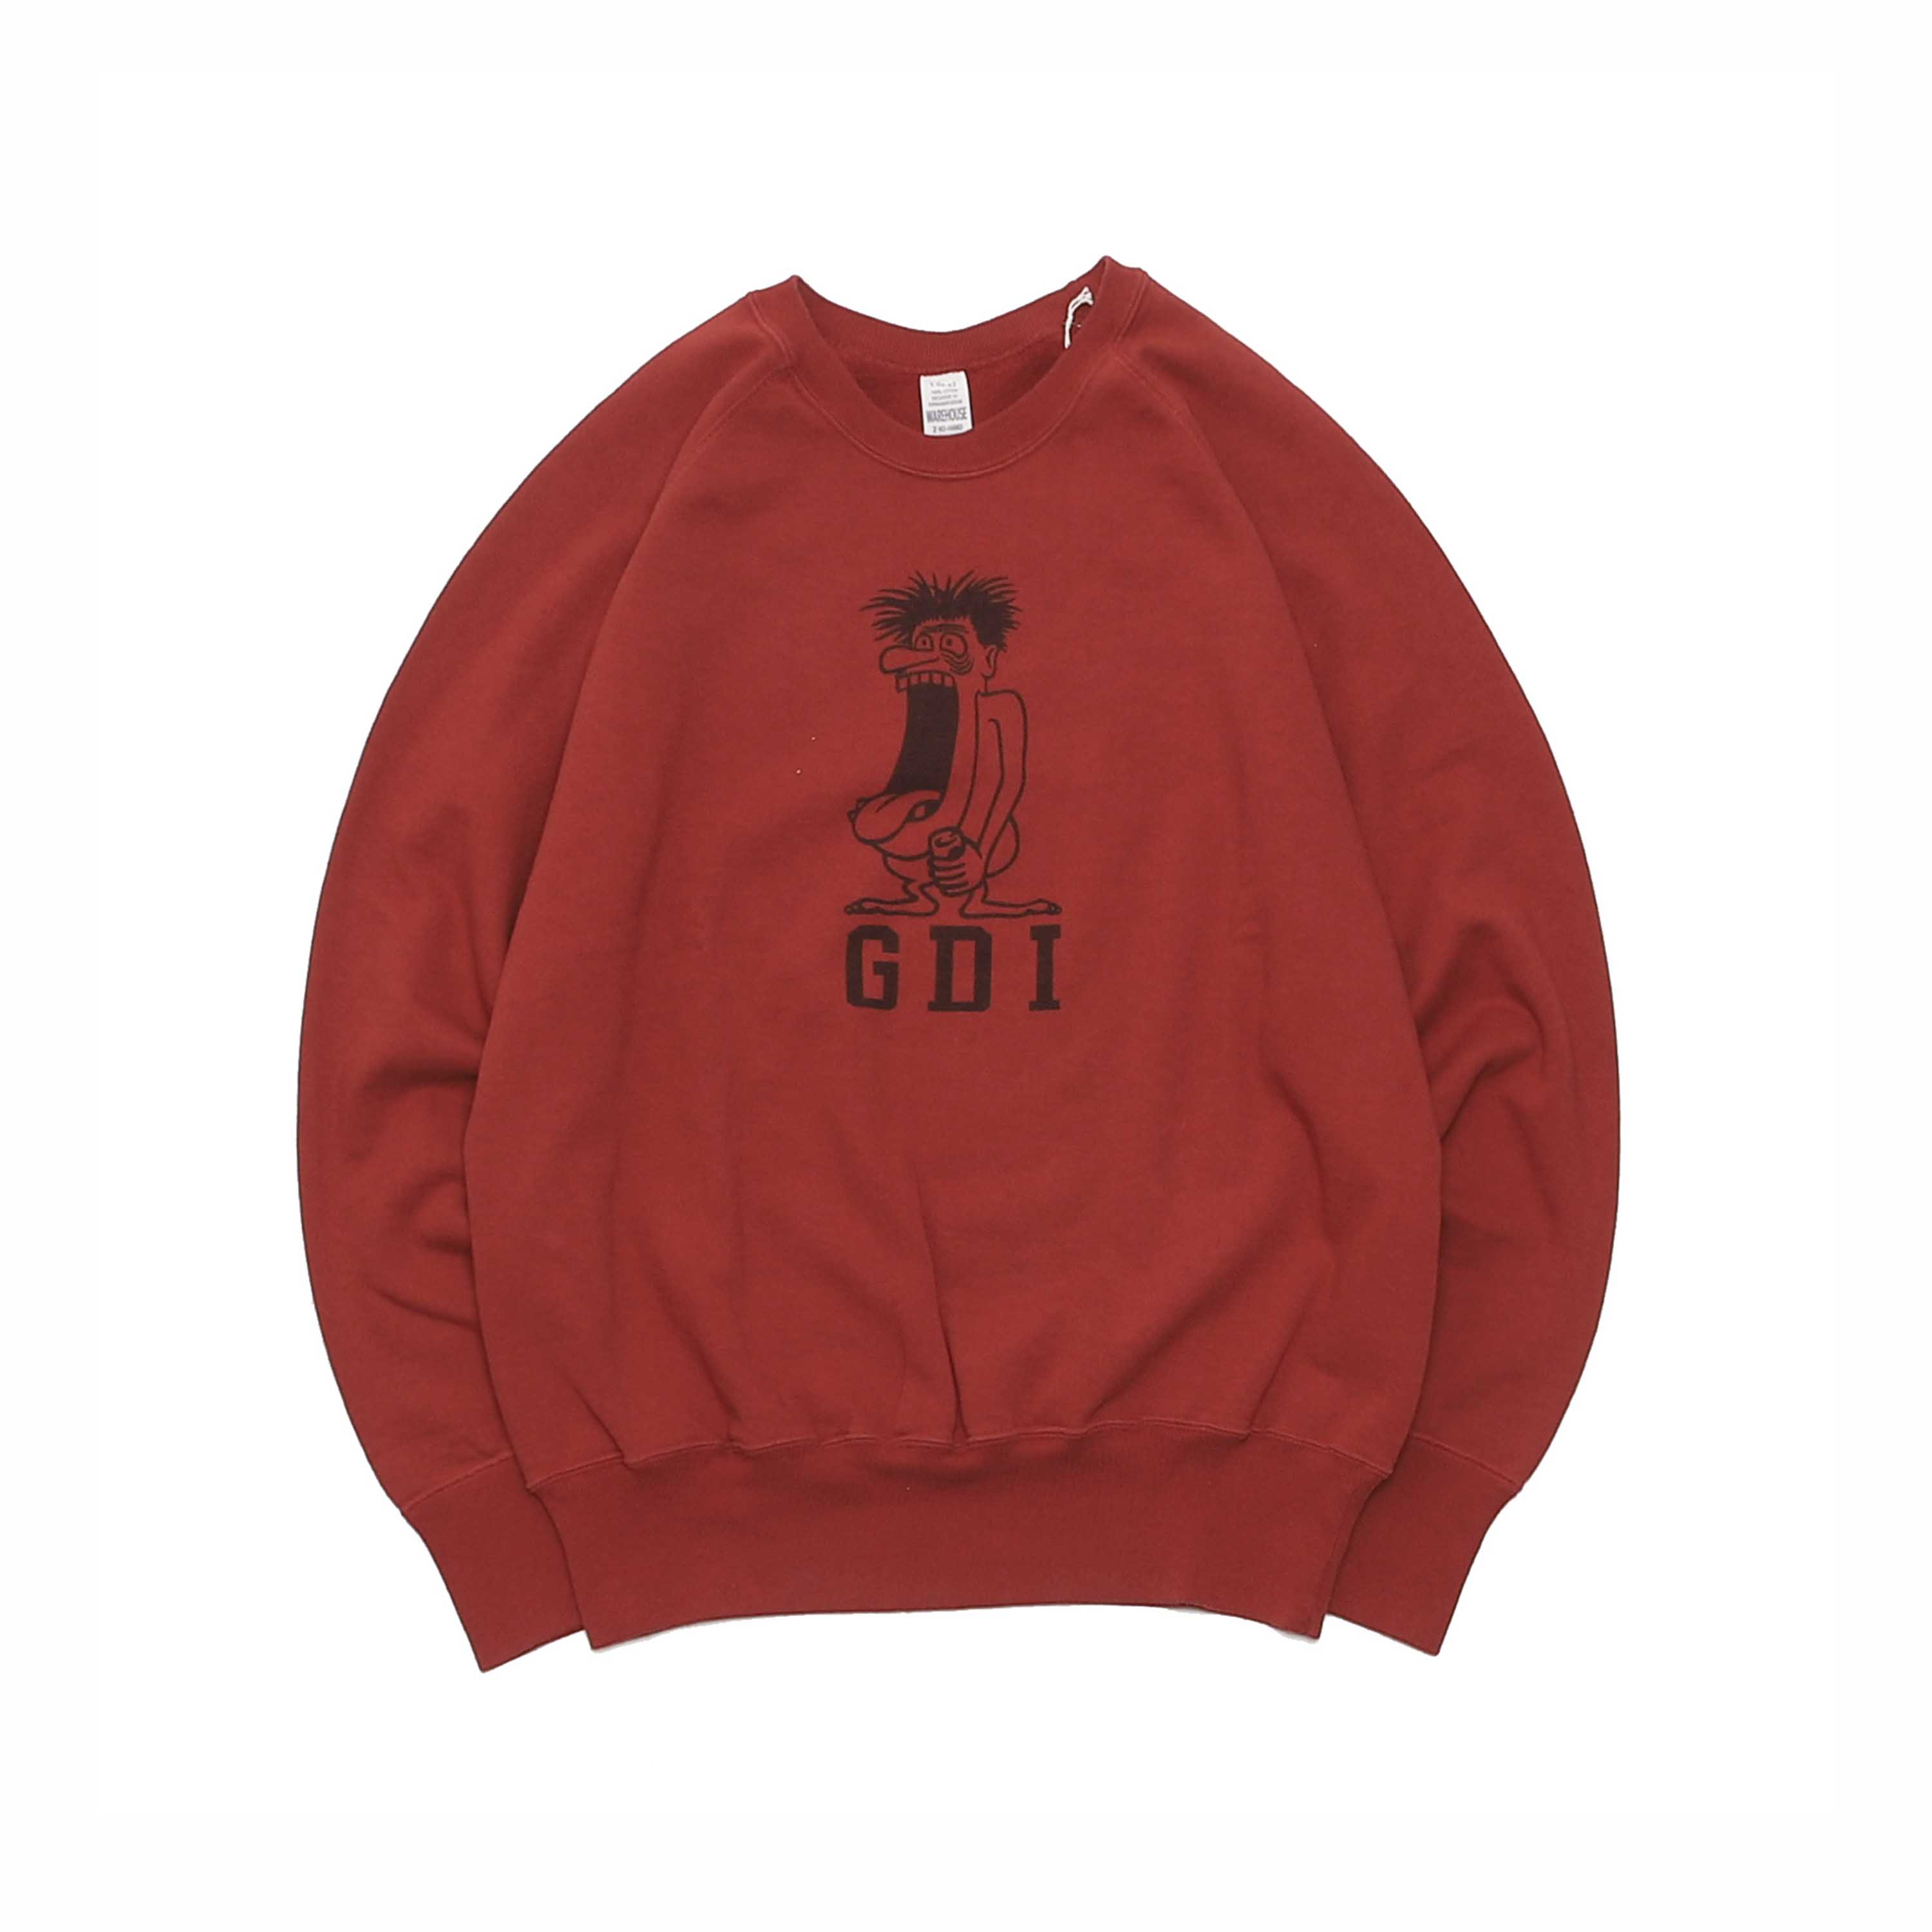 LOT 461 GDI - RED